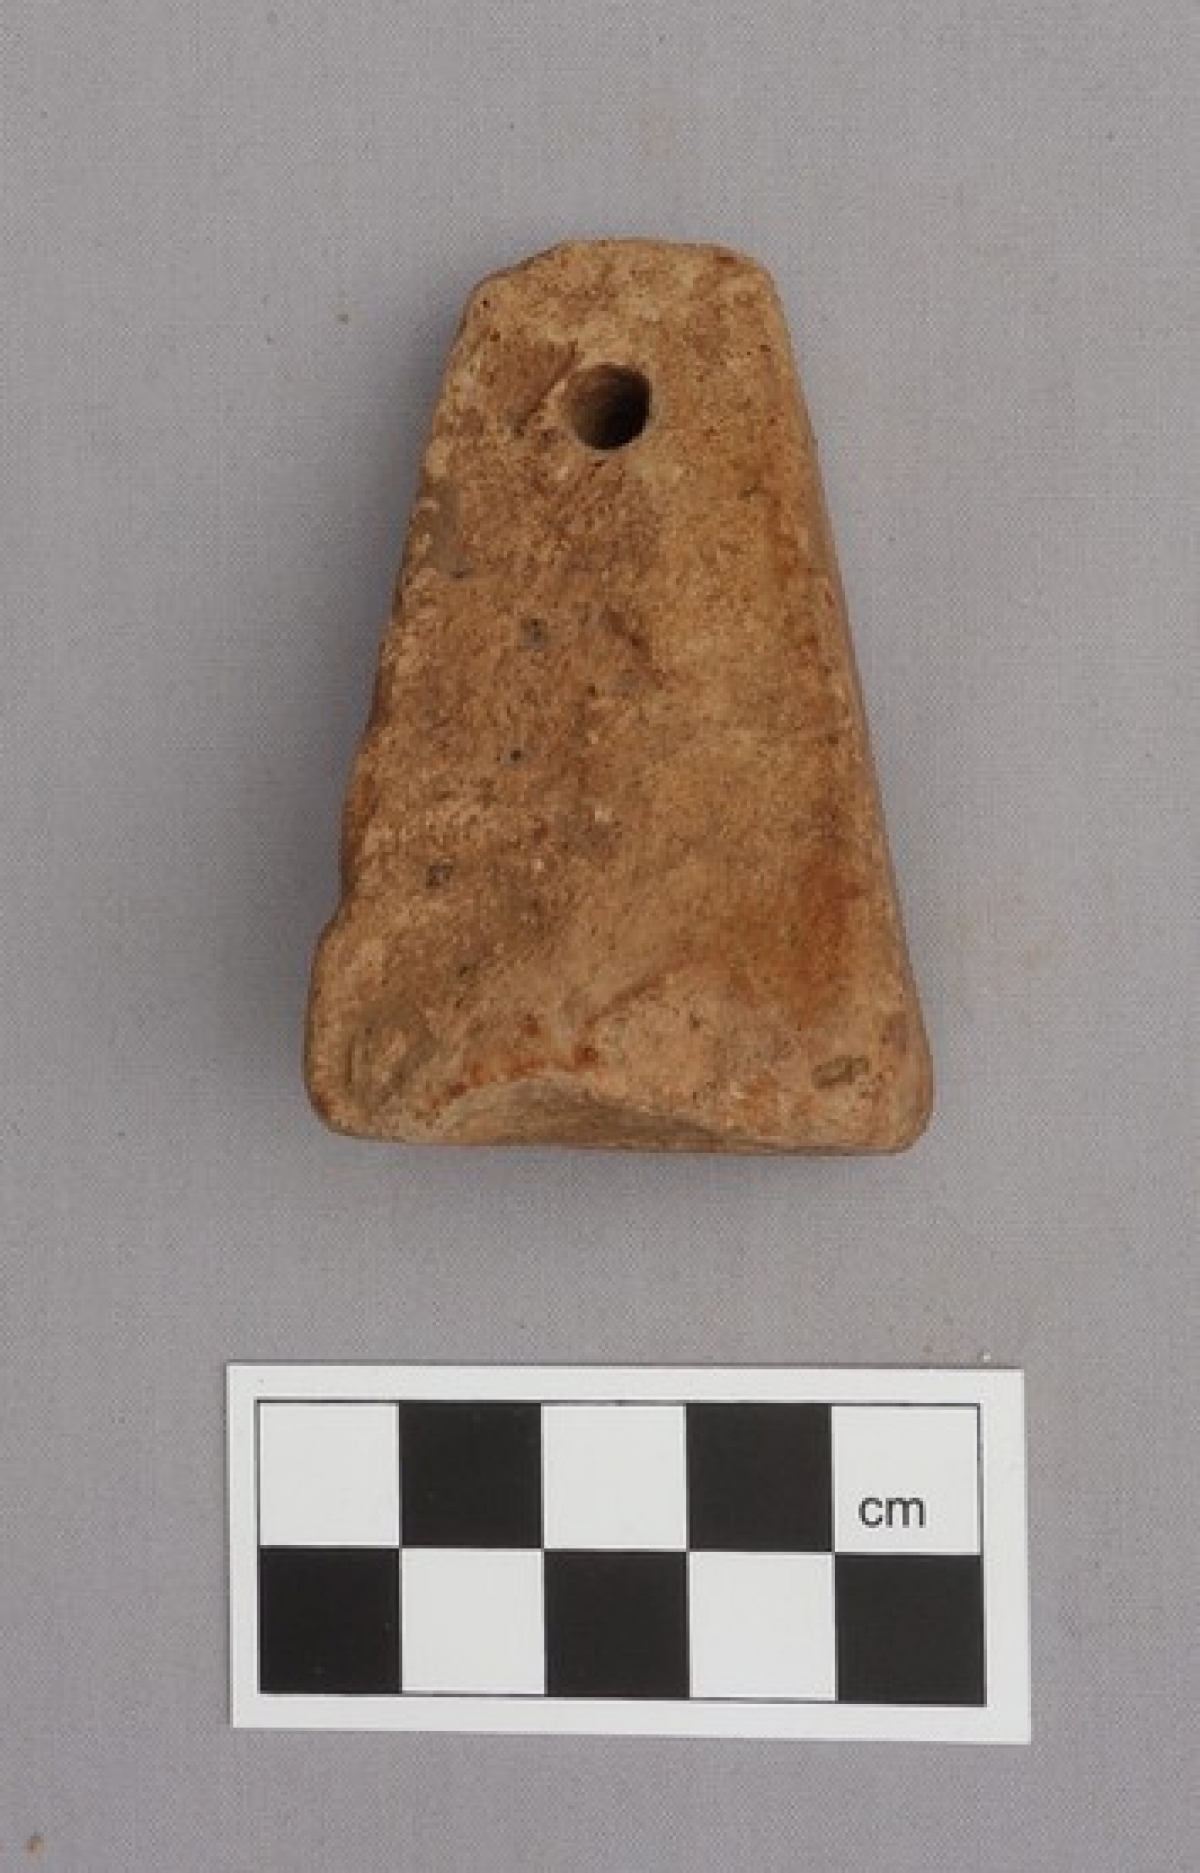 Archaic Greek loom weight, made of clay.